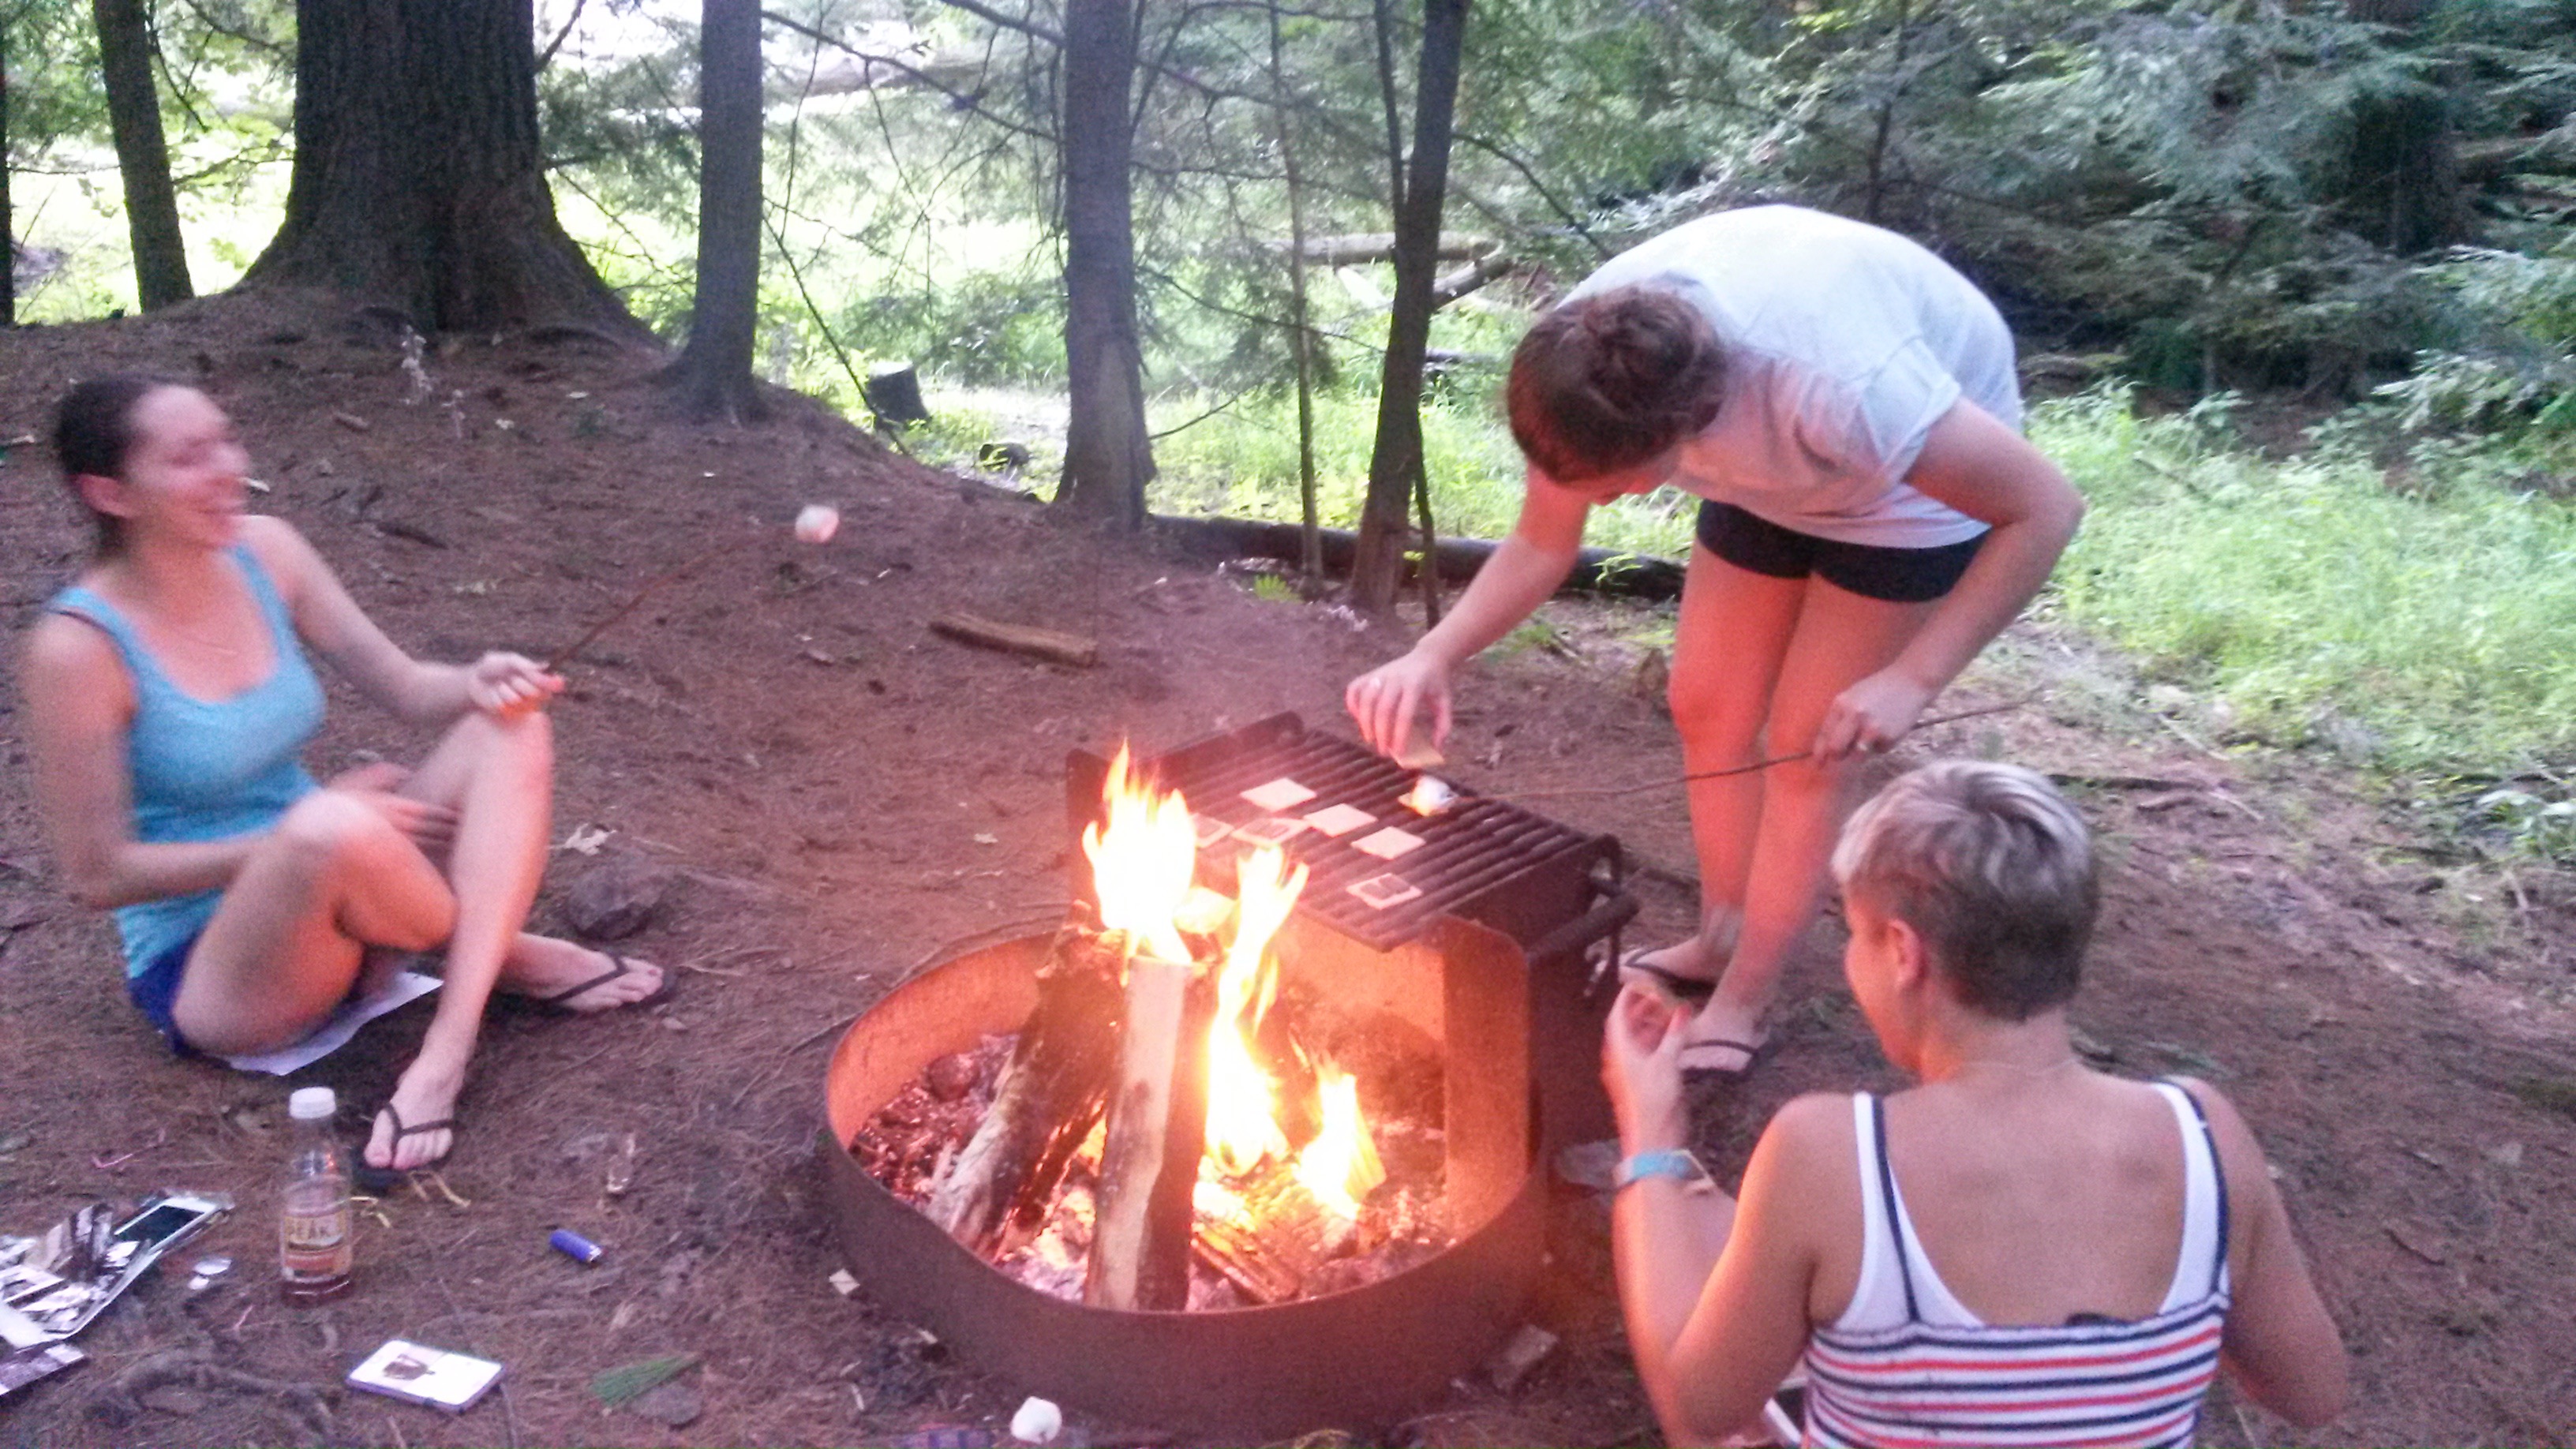 Rigby lab roasting S'mores at Storrs Pond, August 10, 2018